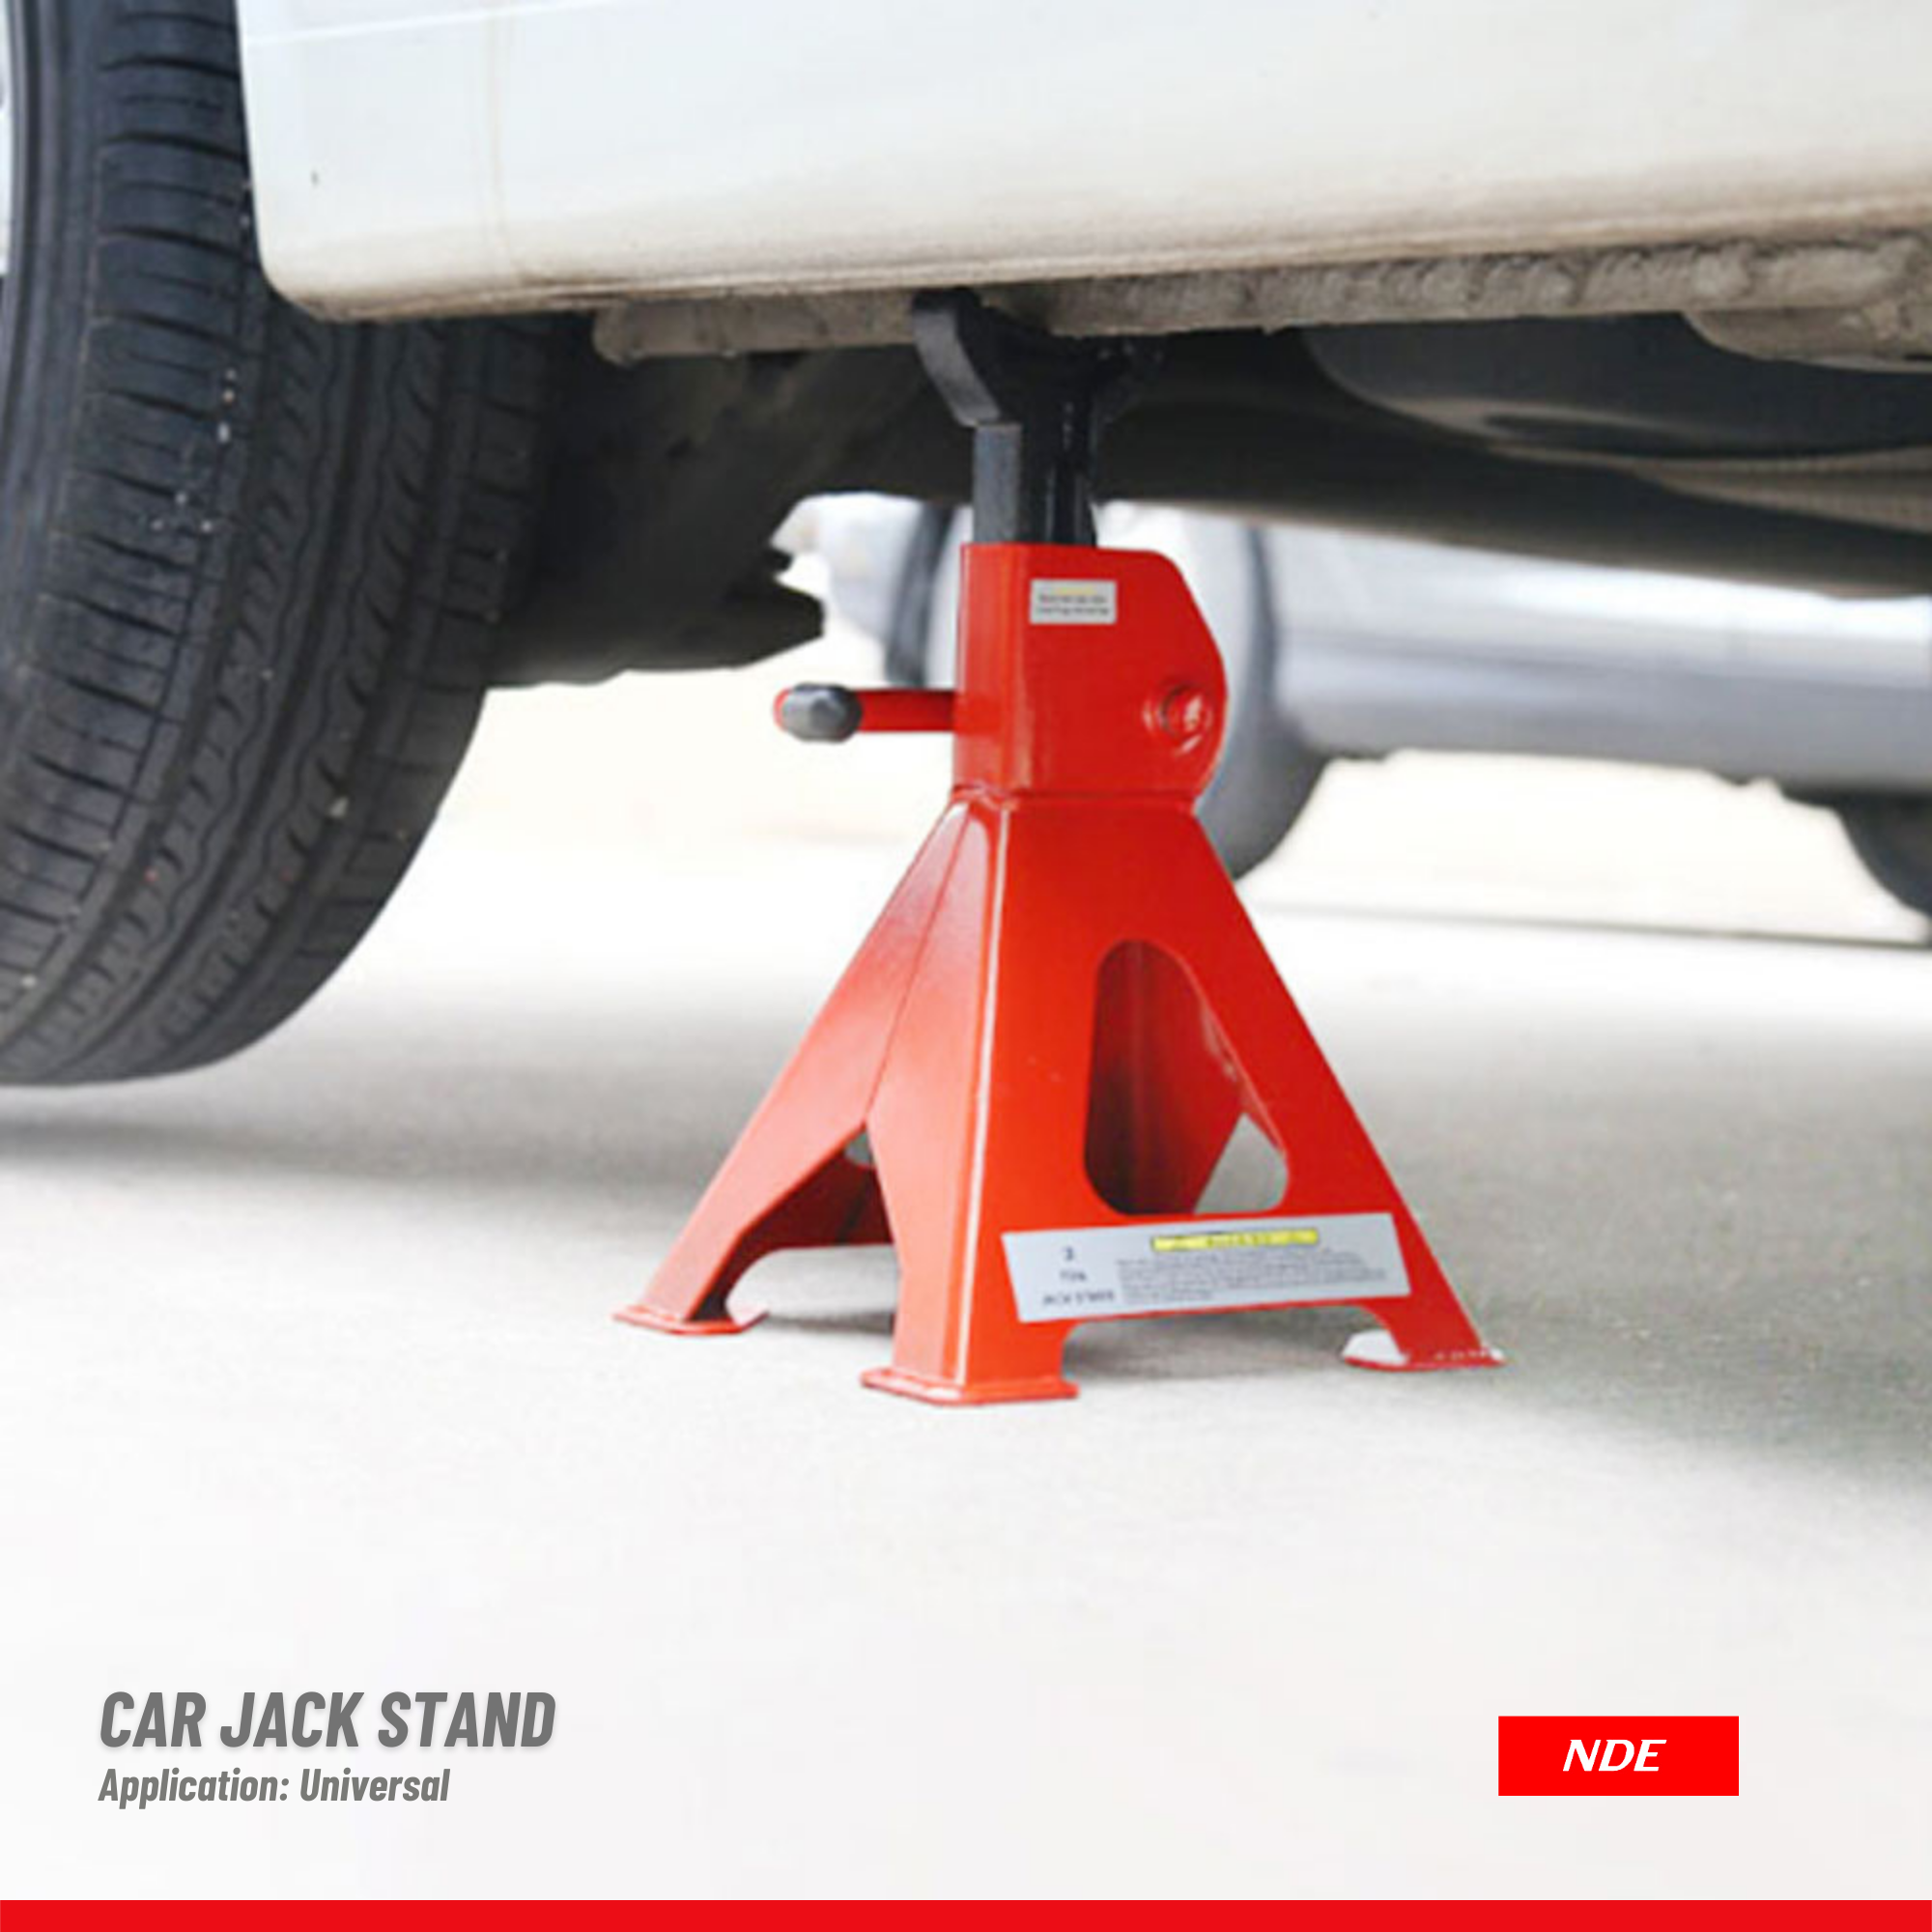 JACK STAND FOR UNIVERSAL APPLICATION